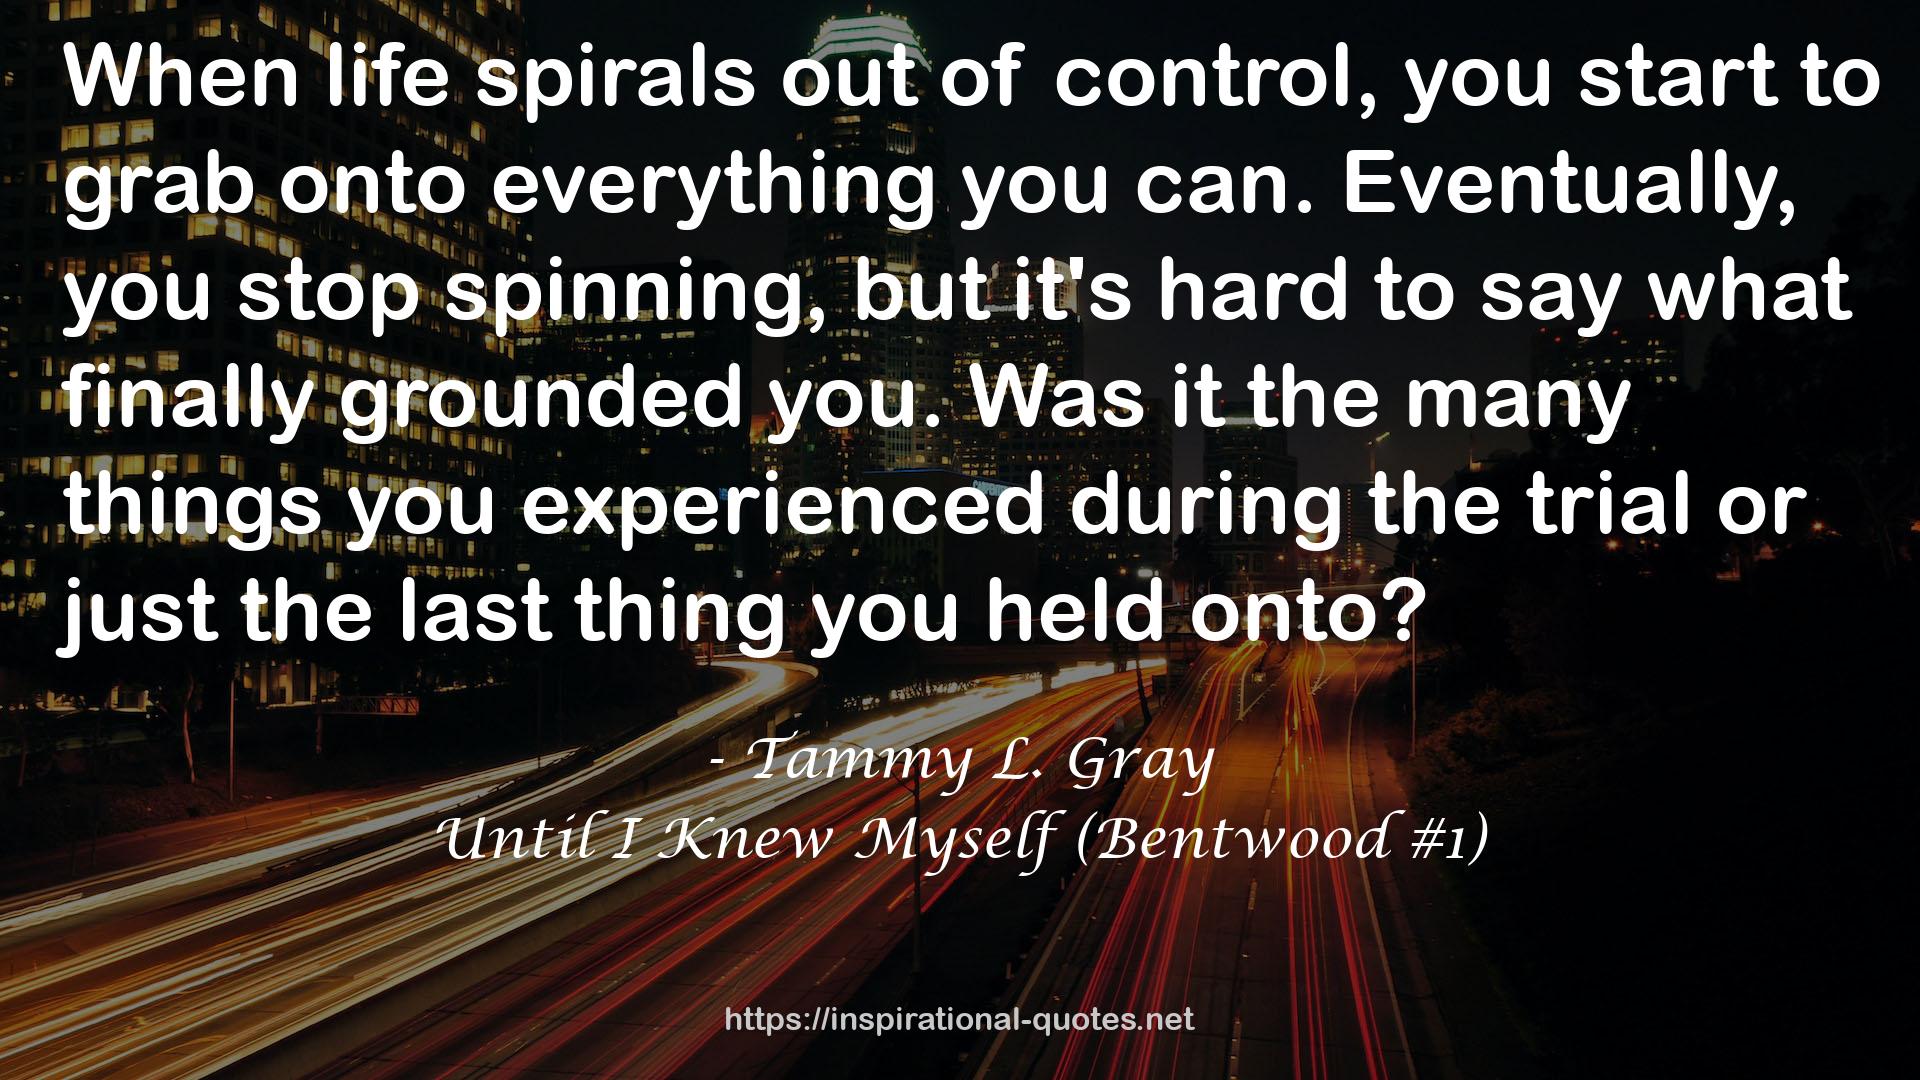 Until I Knew Myself (Bentwood #1) QUOTES